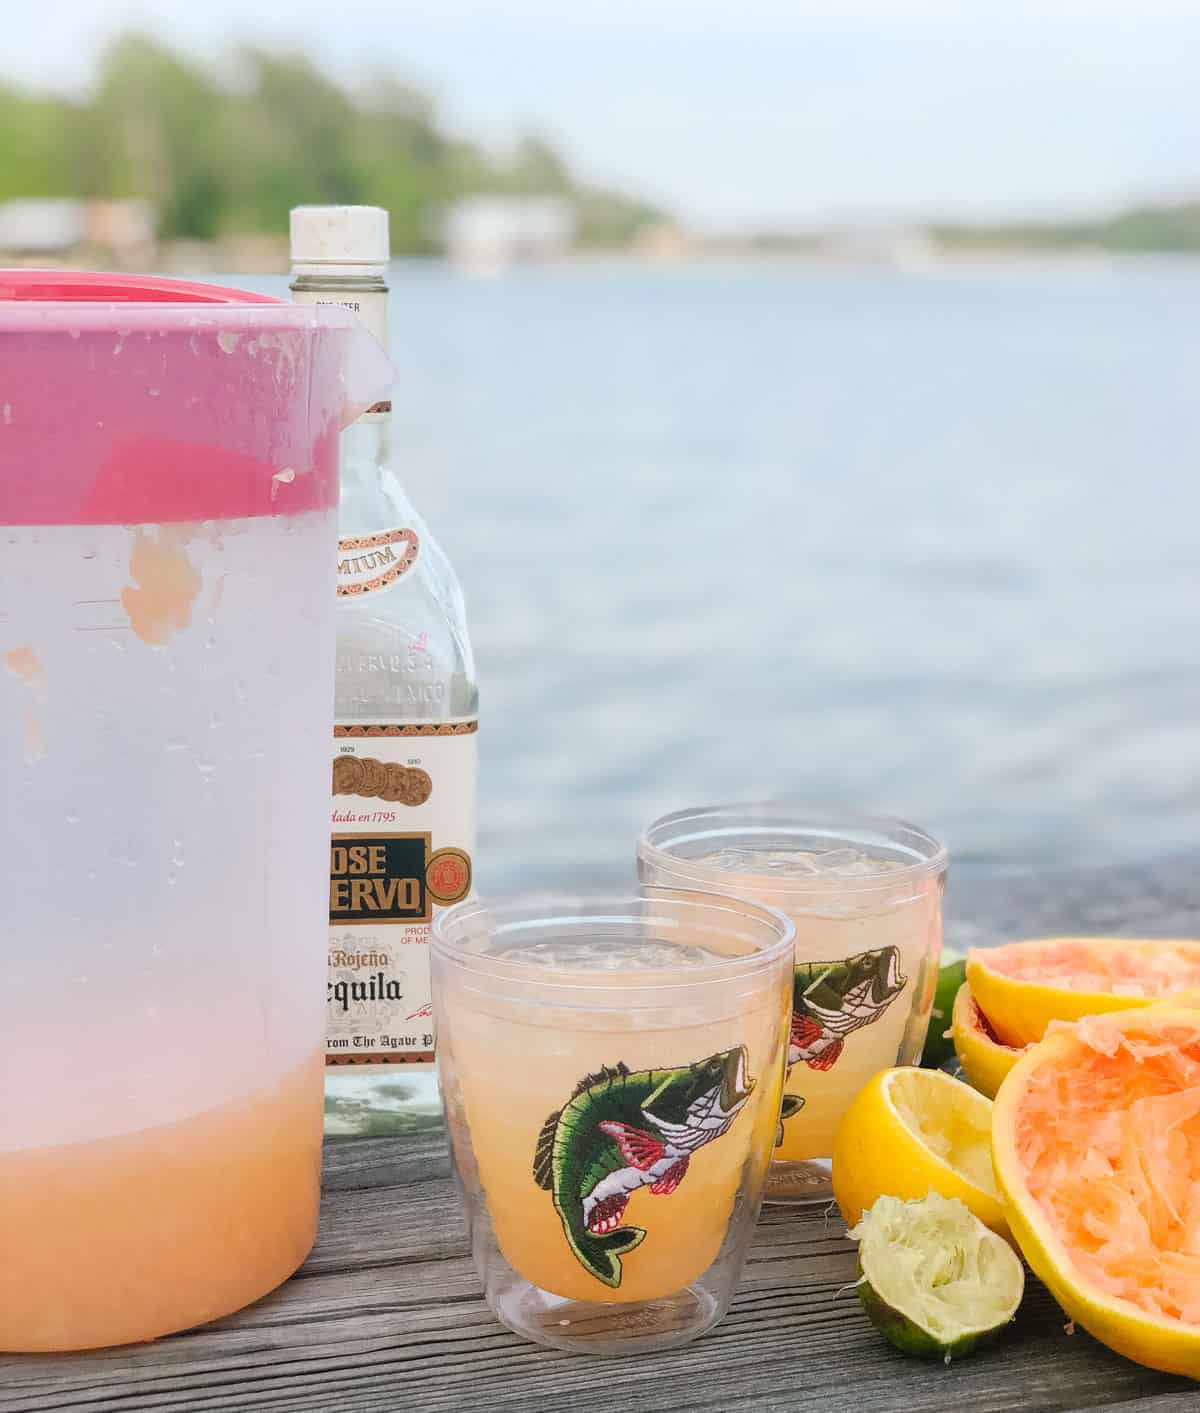 pitcher of margaritas, bottle of tequila, two cups with fish on it filled with grapefruit margaritas, juiced fruit all on a wooden table overlooking the water.